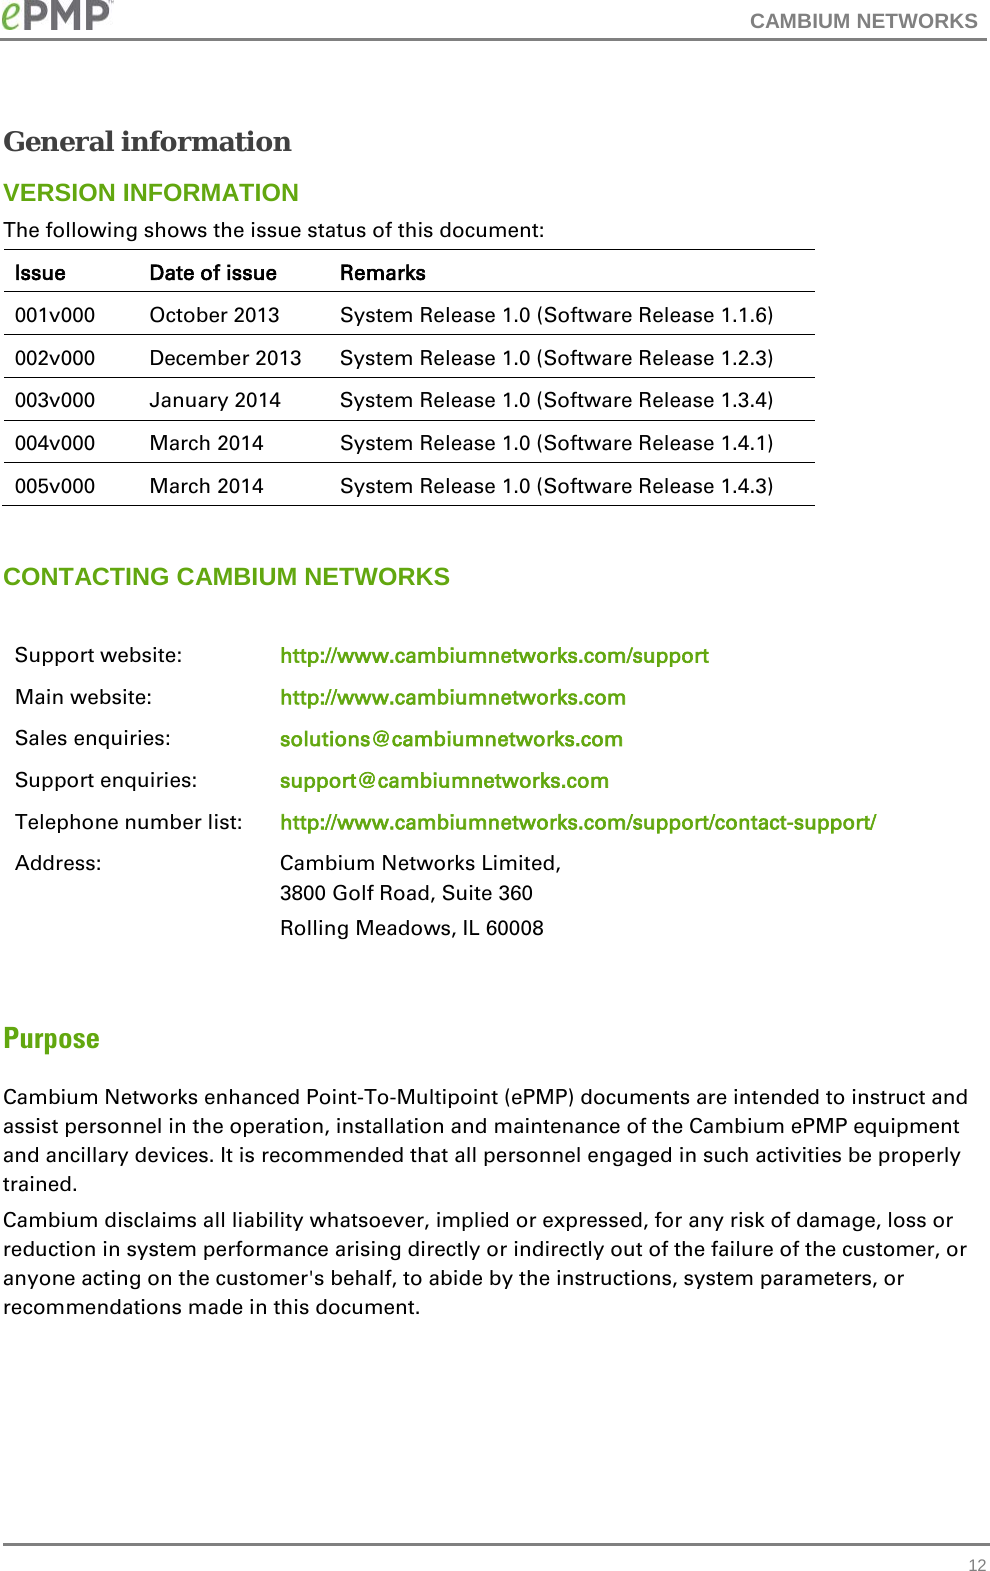 CAMBIUM NETWORKS  General information VERSION INFORMATION The following shows the issue status of this document: Issue Date of issue Remarks 001v000  October 2013 System Release 1.0 (Software Release 1.1.6) 002v000  December 2013 System Release 1.0 (Software Release 1.2.3) 003v000 January 2014 System Release 1.0 (Software Release 1.3.4) 004v000 March 2014 System Release 1.0 (Software Release 1.4.1) 005v000 March 2014 System Release 1.0 (Software Release 1.4.3)  CONTACTING CAMBIUM NETWORKS  Support website: http://www.cambiumnetworks.com/support Main website: http://www.cambiumnetworks.com Sales enquiries: solutions@cambiumnetworks.com Support enquiries: support@cambiumnetworks.com Telephone number list: http://www.cambiumnetworks.com/support/contact-support/ Address:  Cambium Networks Limited, 3800 Golf Road, Suite 360 Rolling Meadows, IL 60008  Purpose Cambium Networks enhanced Point-To-Multipoint (ePMP) documents are intended to instruct and assist personnel in the operation, installation and maintenance of the Cambium ePMP equipment and ancillary devices. It is recommended that all personnel engaged in such activities be properly trained. Cambium disclaims all liability whatsoever, implied or expressed, for any risk of damage, loss or reduction in system performance arising directly or indirectly out of the failure of the customer, or anyone acting on the customer&apos;s behalf, to abide by the instructions, system parameters, or recommendations made in this document.  12 